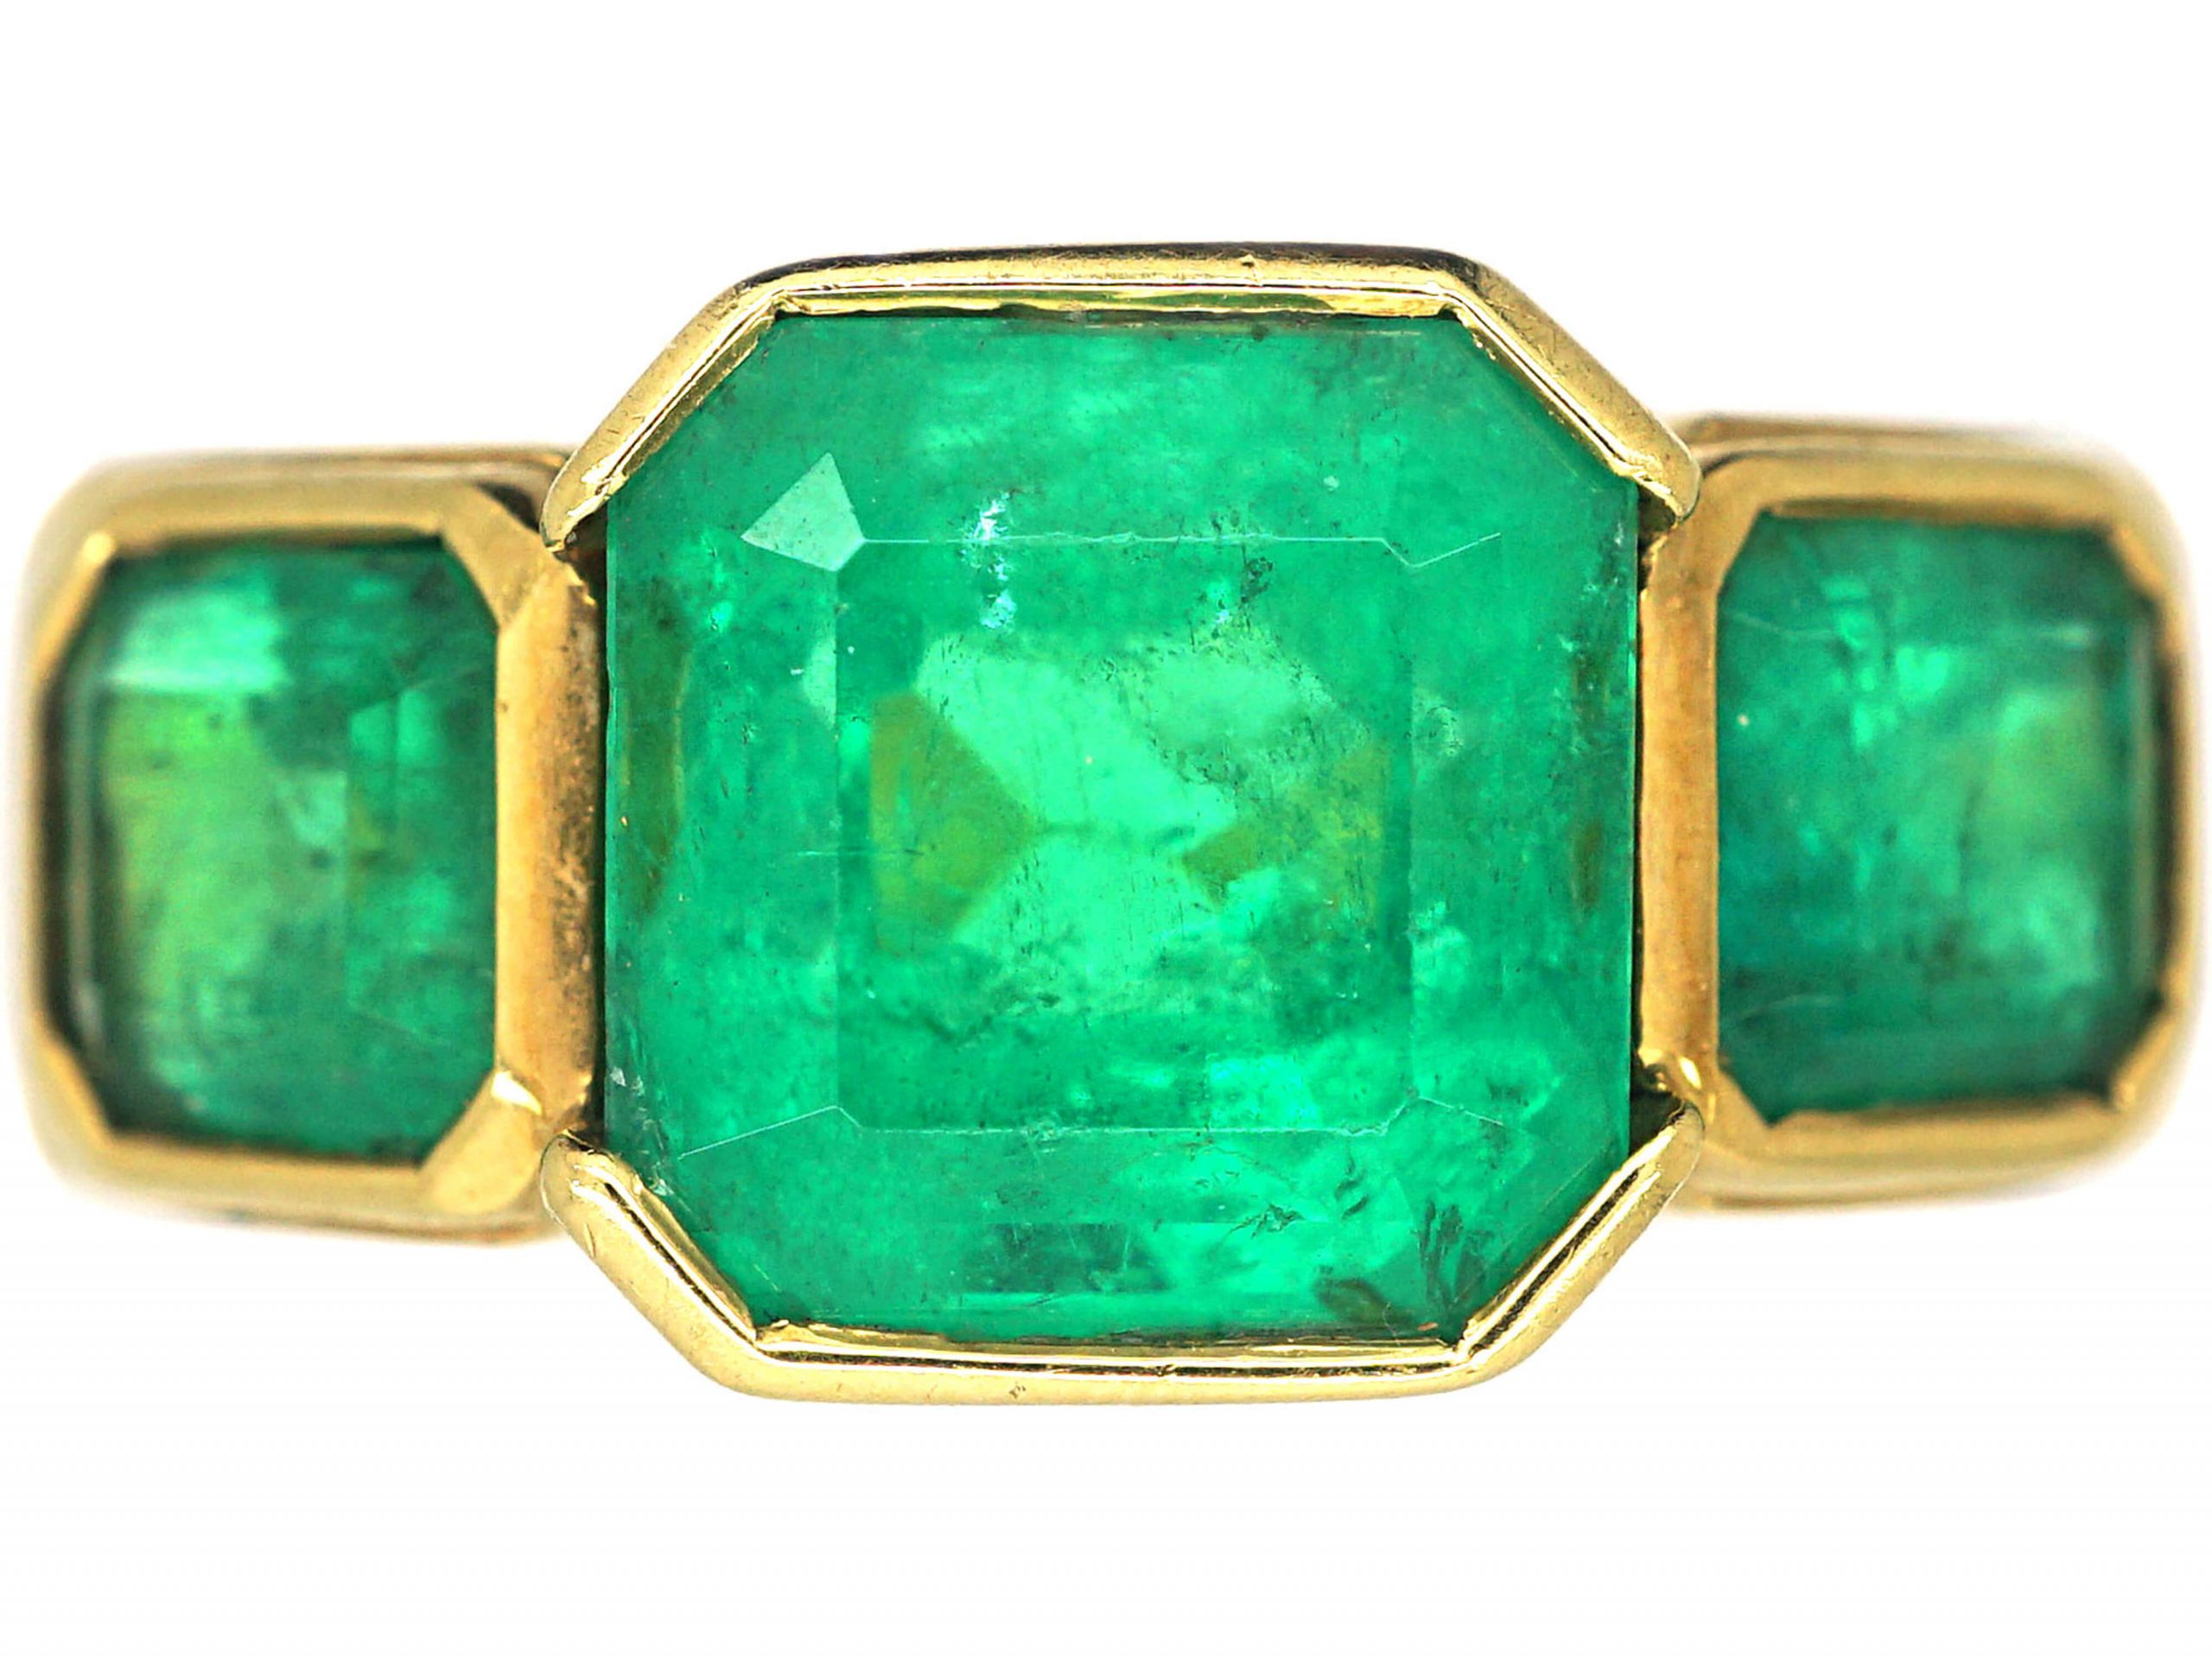 French 18ct Gold Large Three Stone Emerald Ring